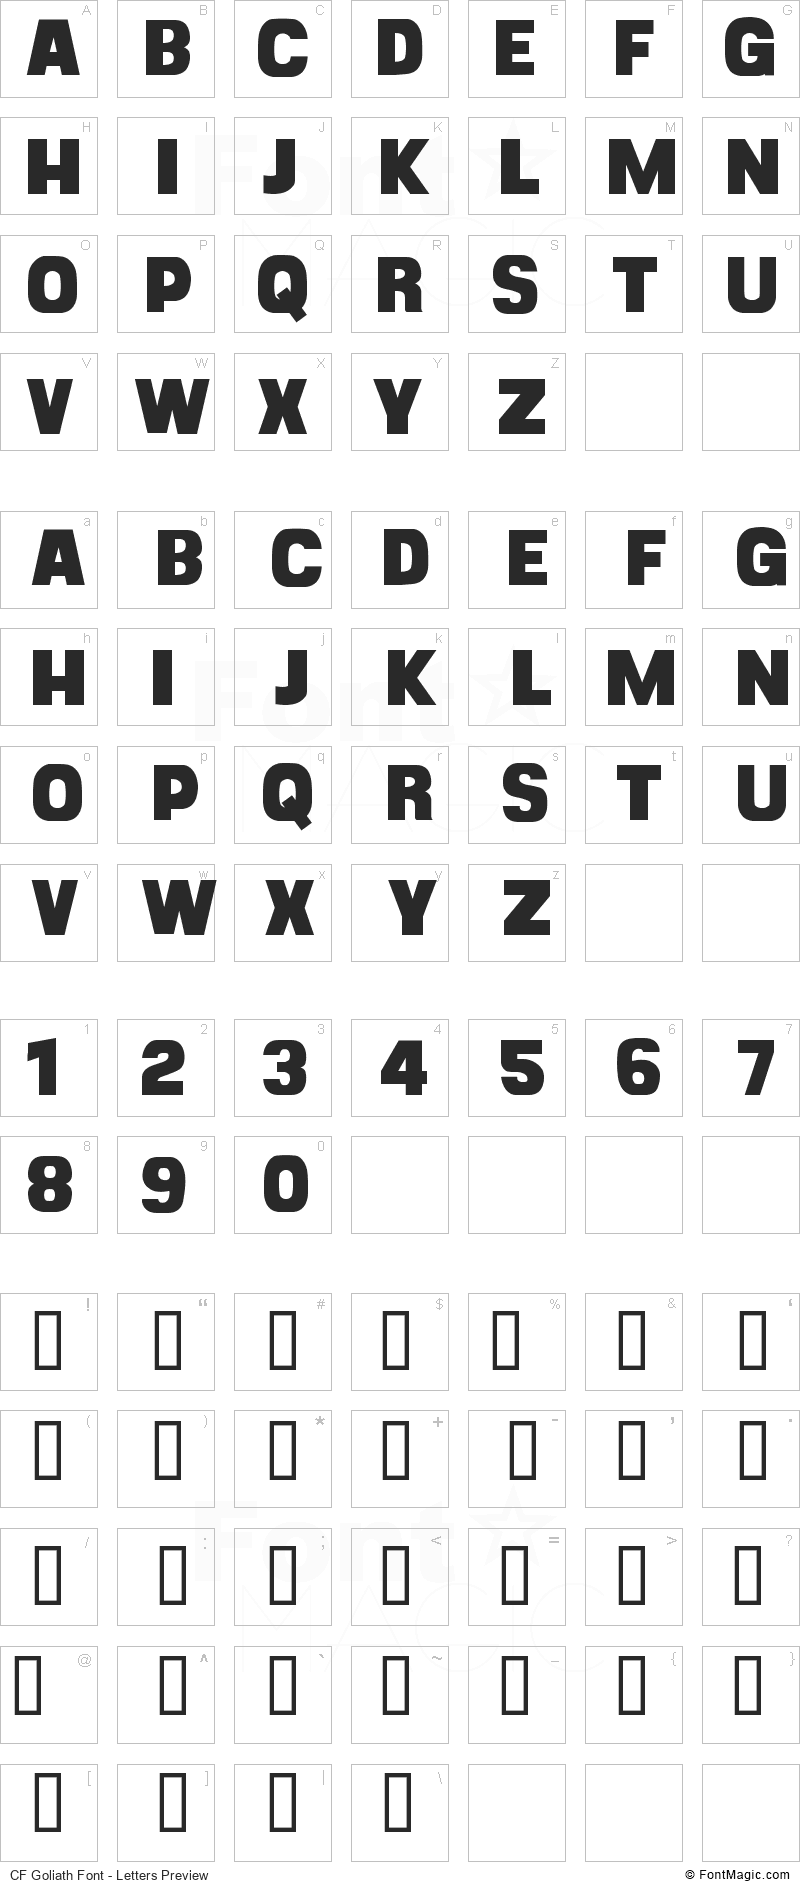 CF Goliath Font - All Latters Preview Chart